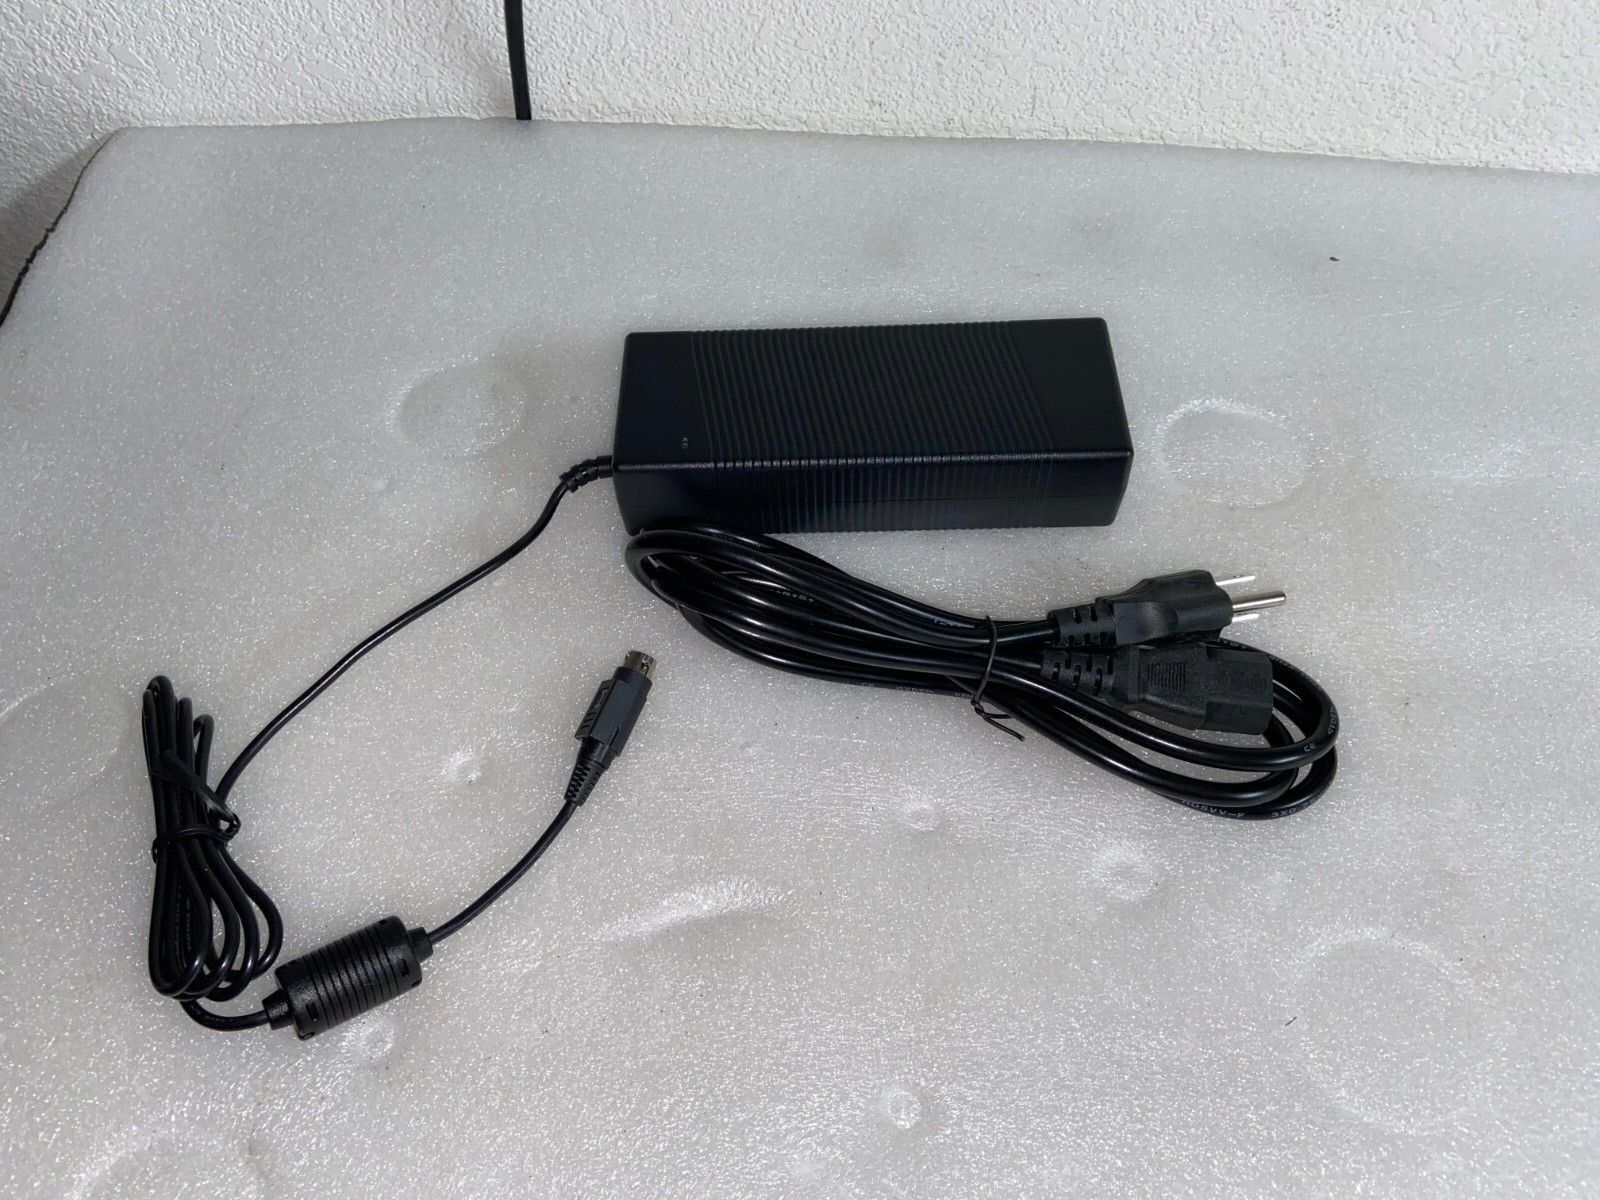 Adapter Tech STD-24050 AC Adapter 4-Pin Power Supply 24V -- 5A w/ Power Cord Type: 4-Pin Power Adapter Color: Black